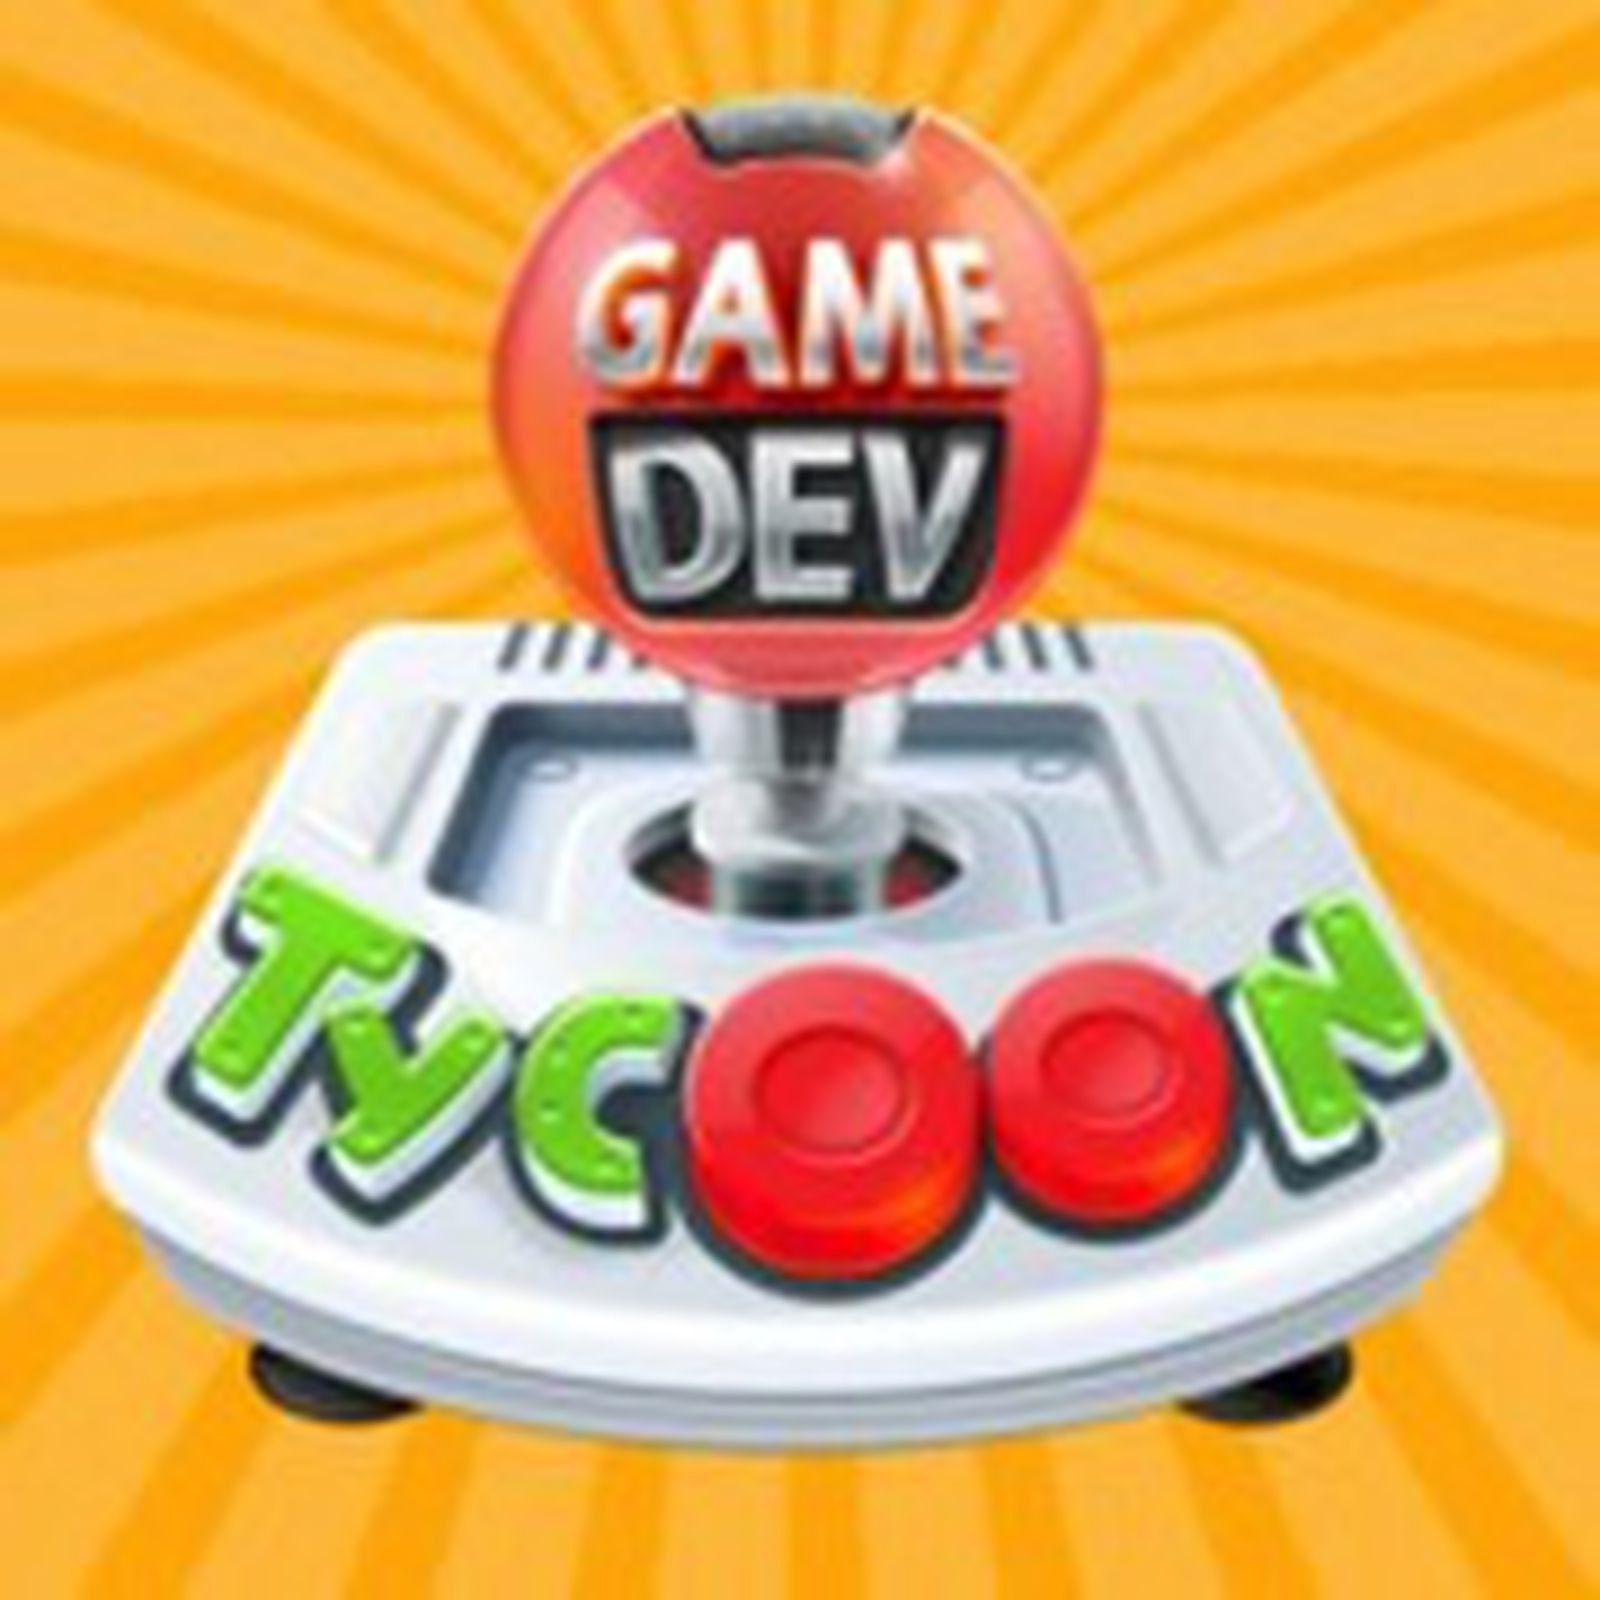 Game Dev Tycoon for Nintendo Switch - Nintendo Official Site